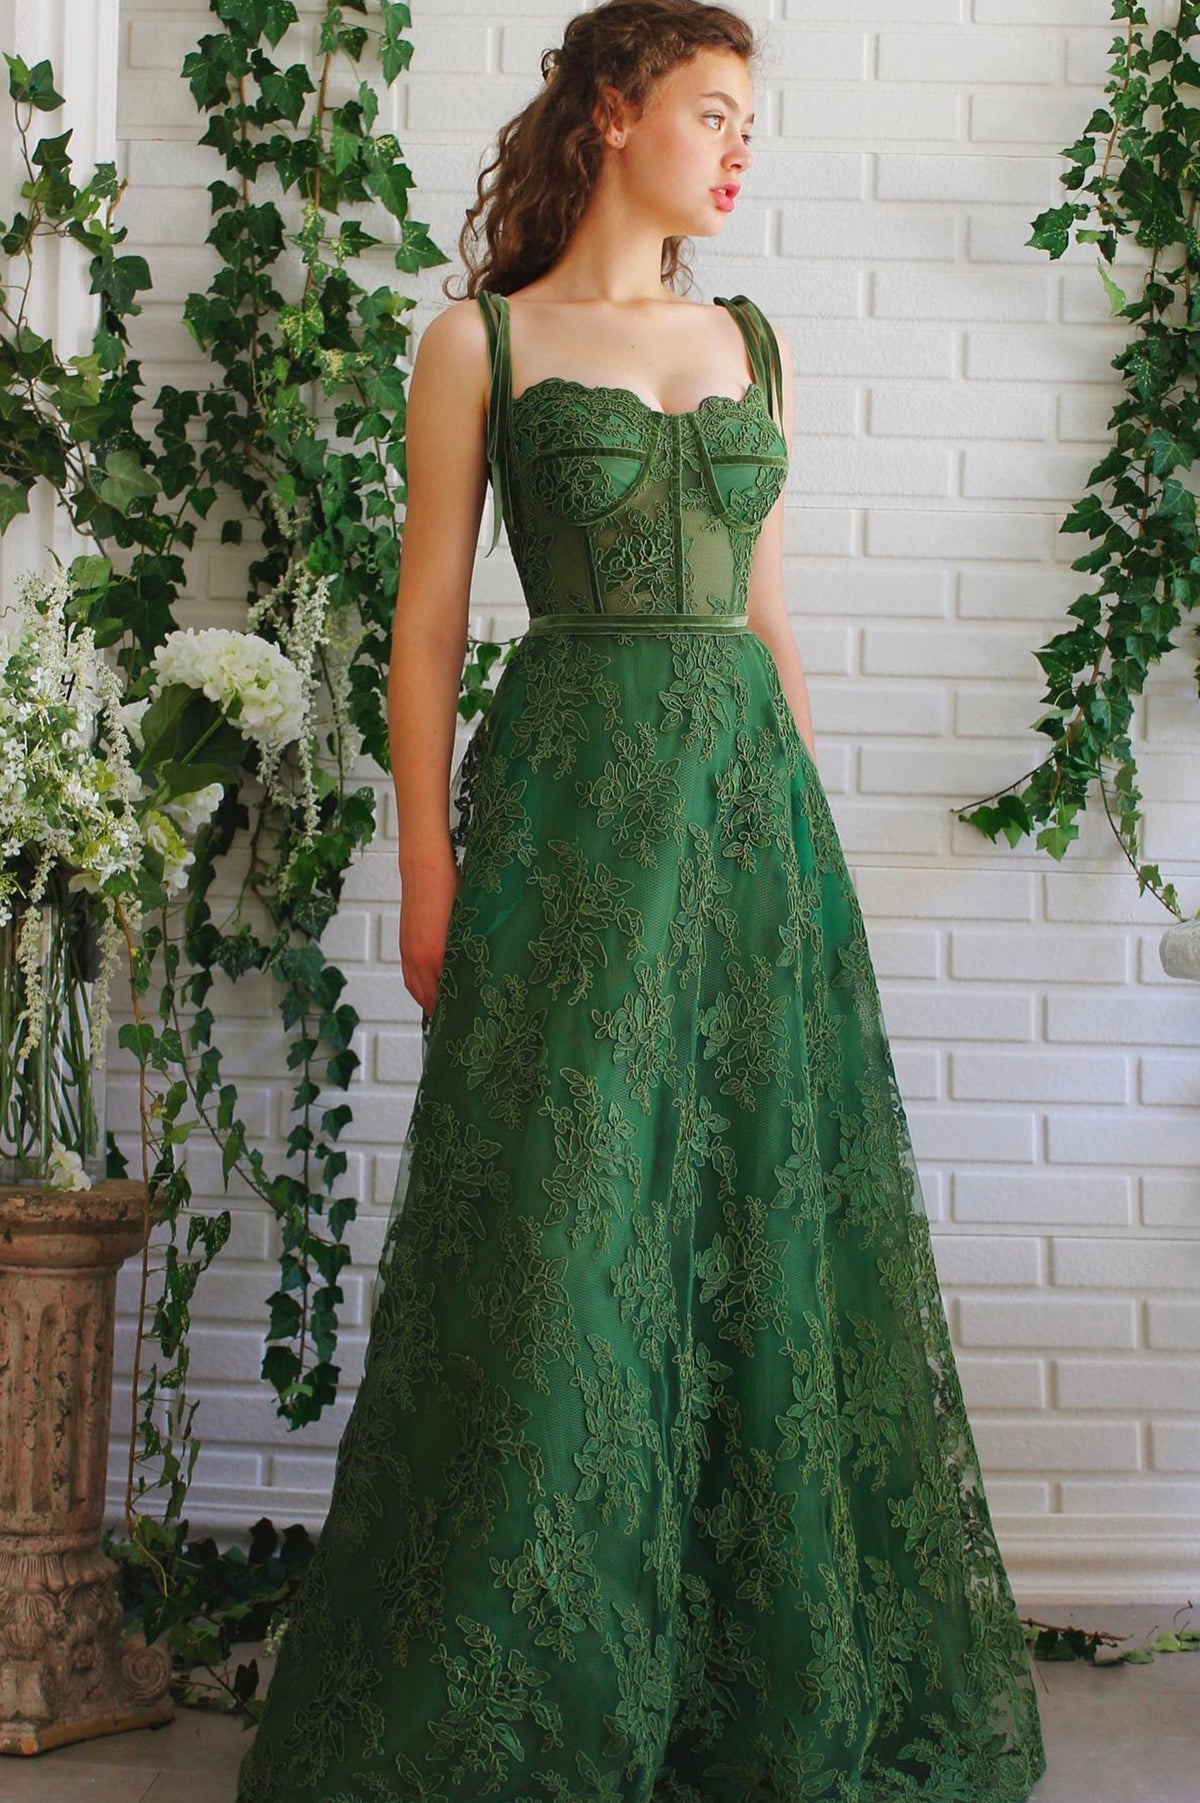 Green Lace Long Formal Evening Dress, A-Line Spaghetti Straps Prom Dress